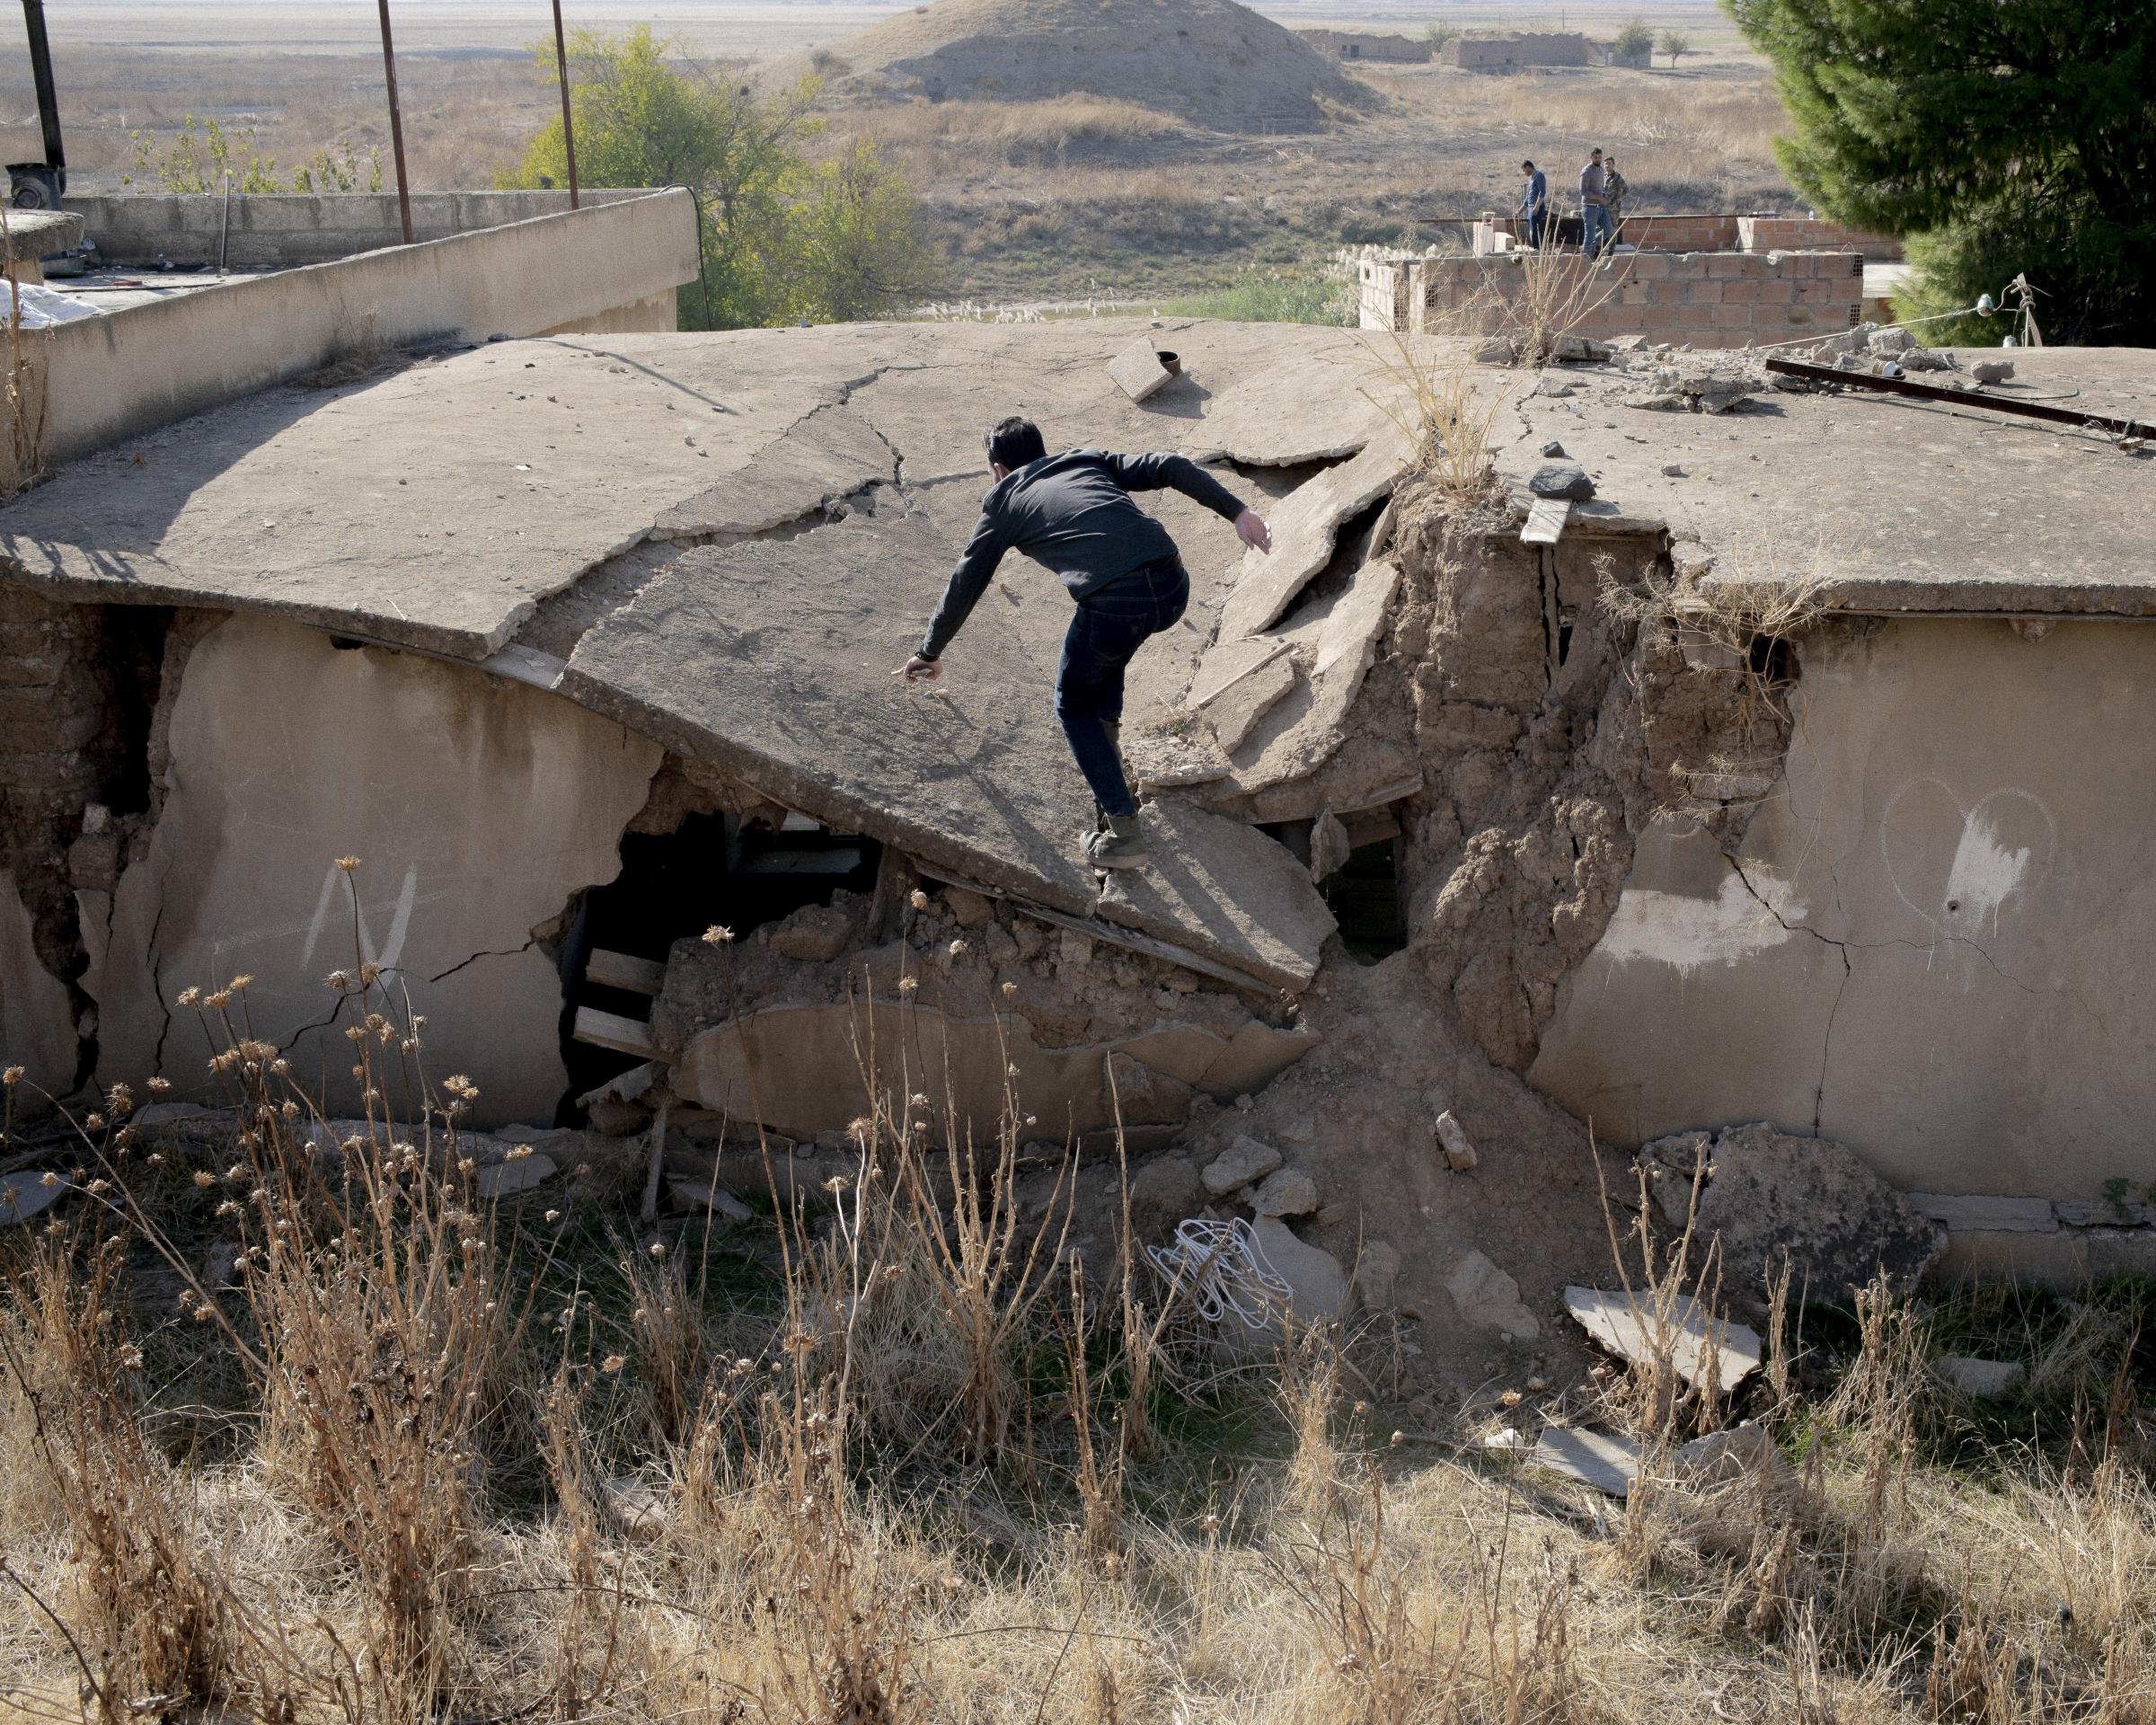 On National Geographic: 11 years into Syria's civil war, this is what life looks like - A man runs to avoid being targeted by snipers of the advanced Turkish forces.